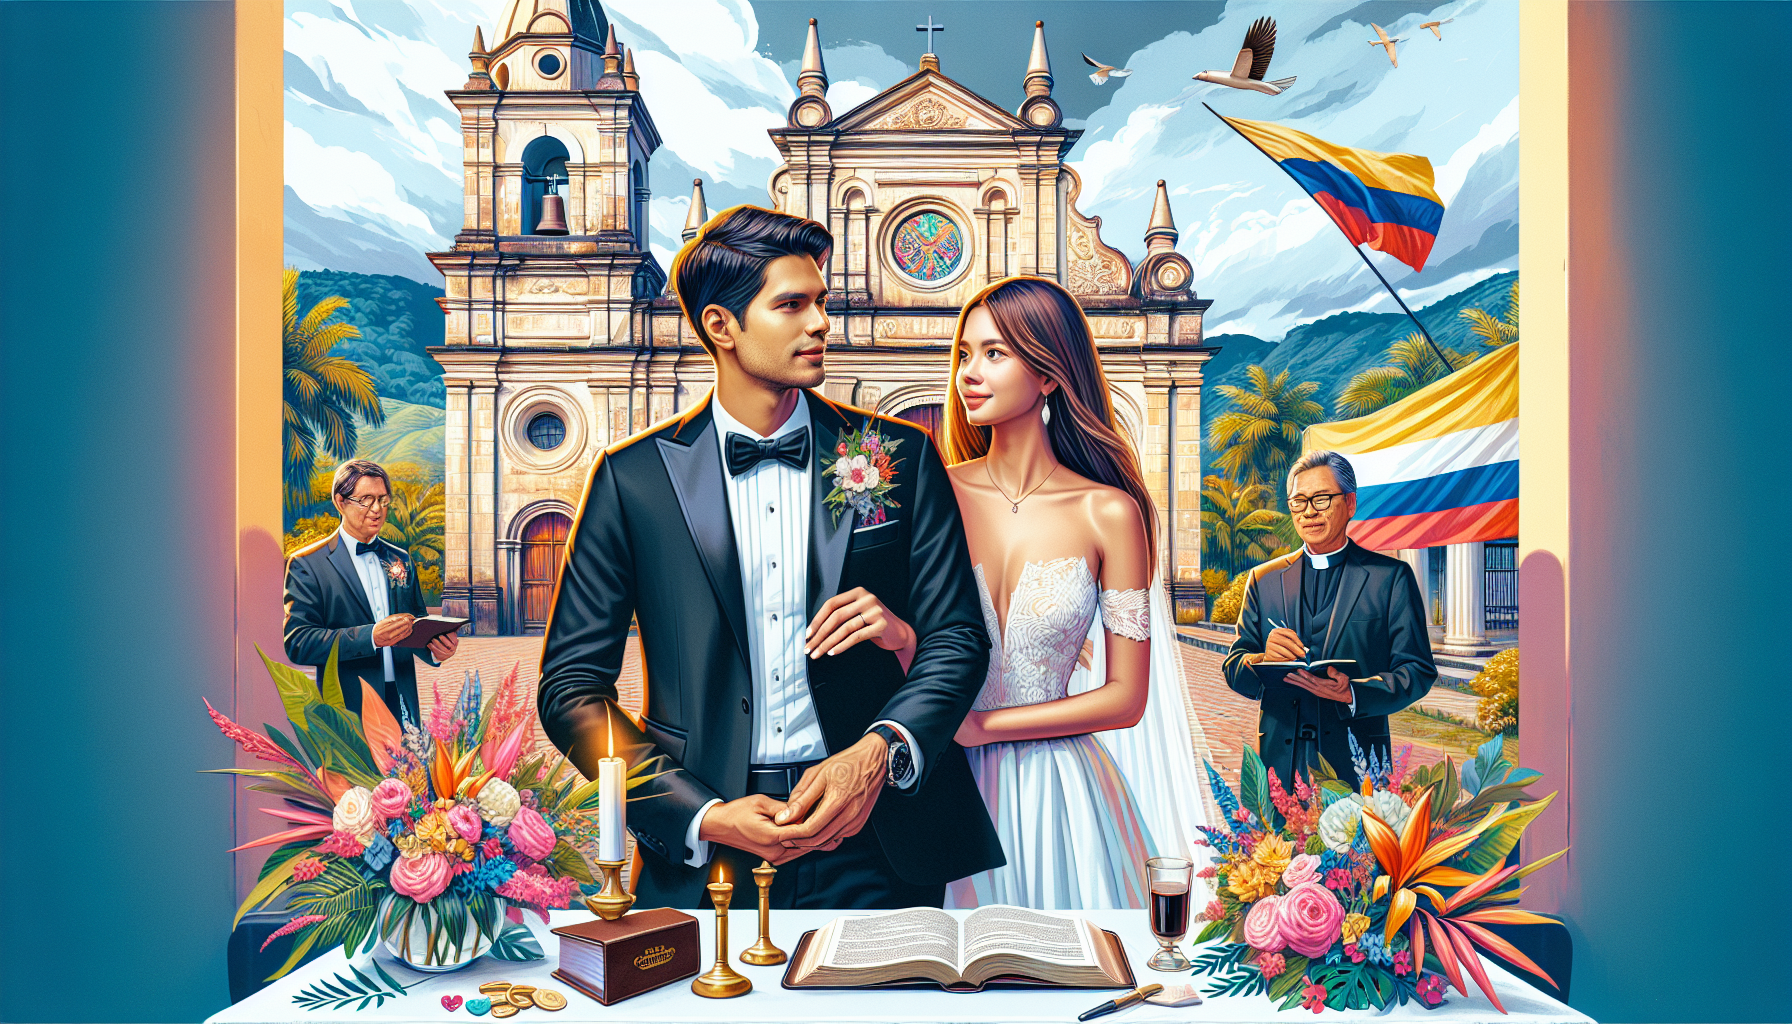 Create an image of a couple standing in front of a historic Colombian church, holding hands and dressed in elegant wedding attire. The scene should include traditional elements such as a bible and mar